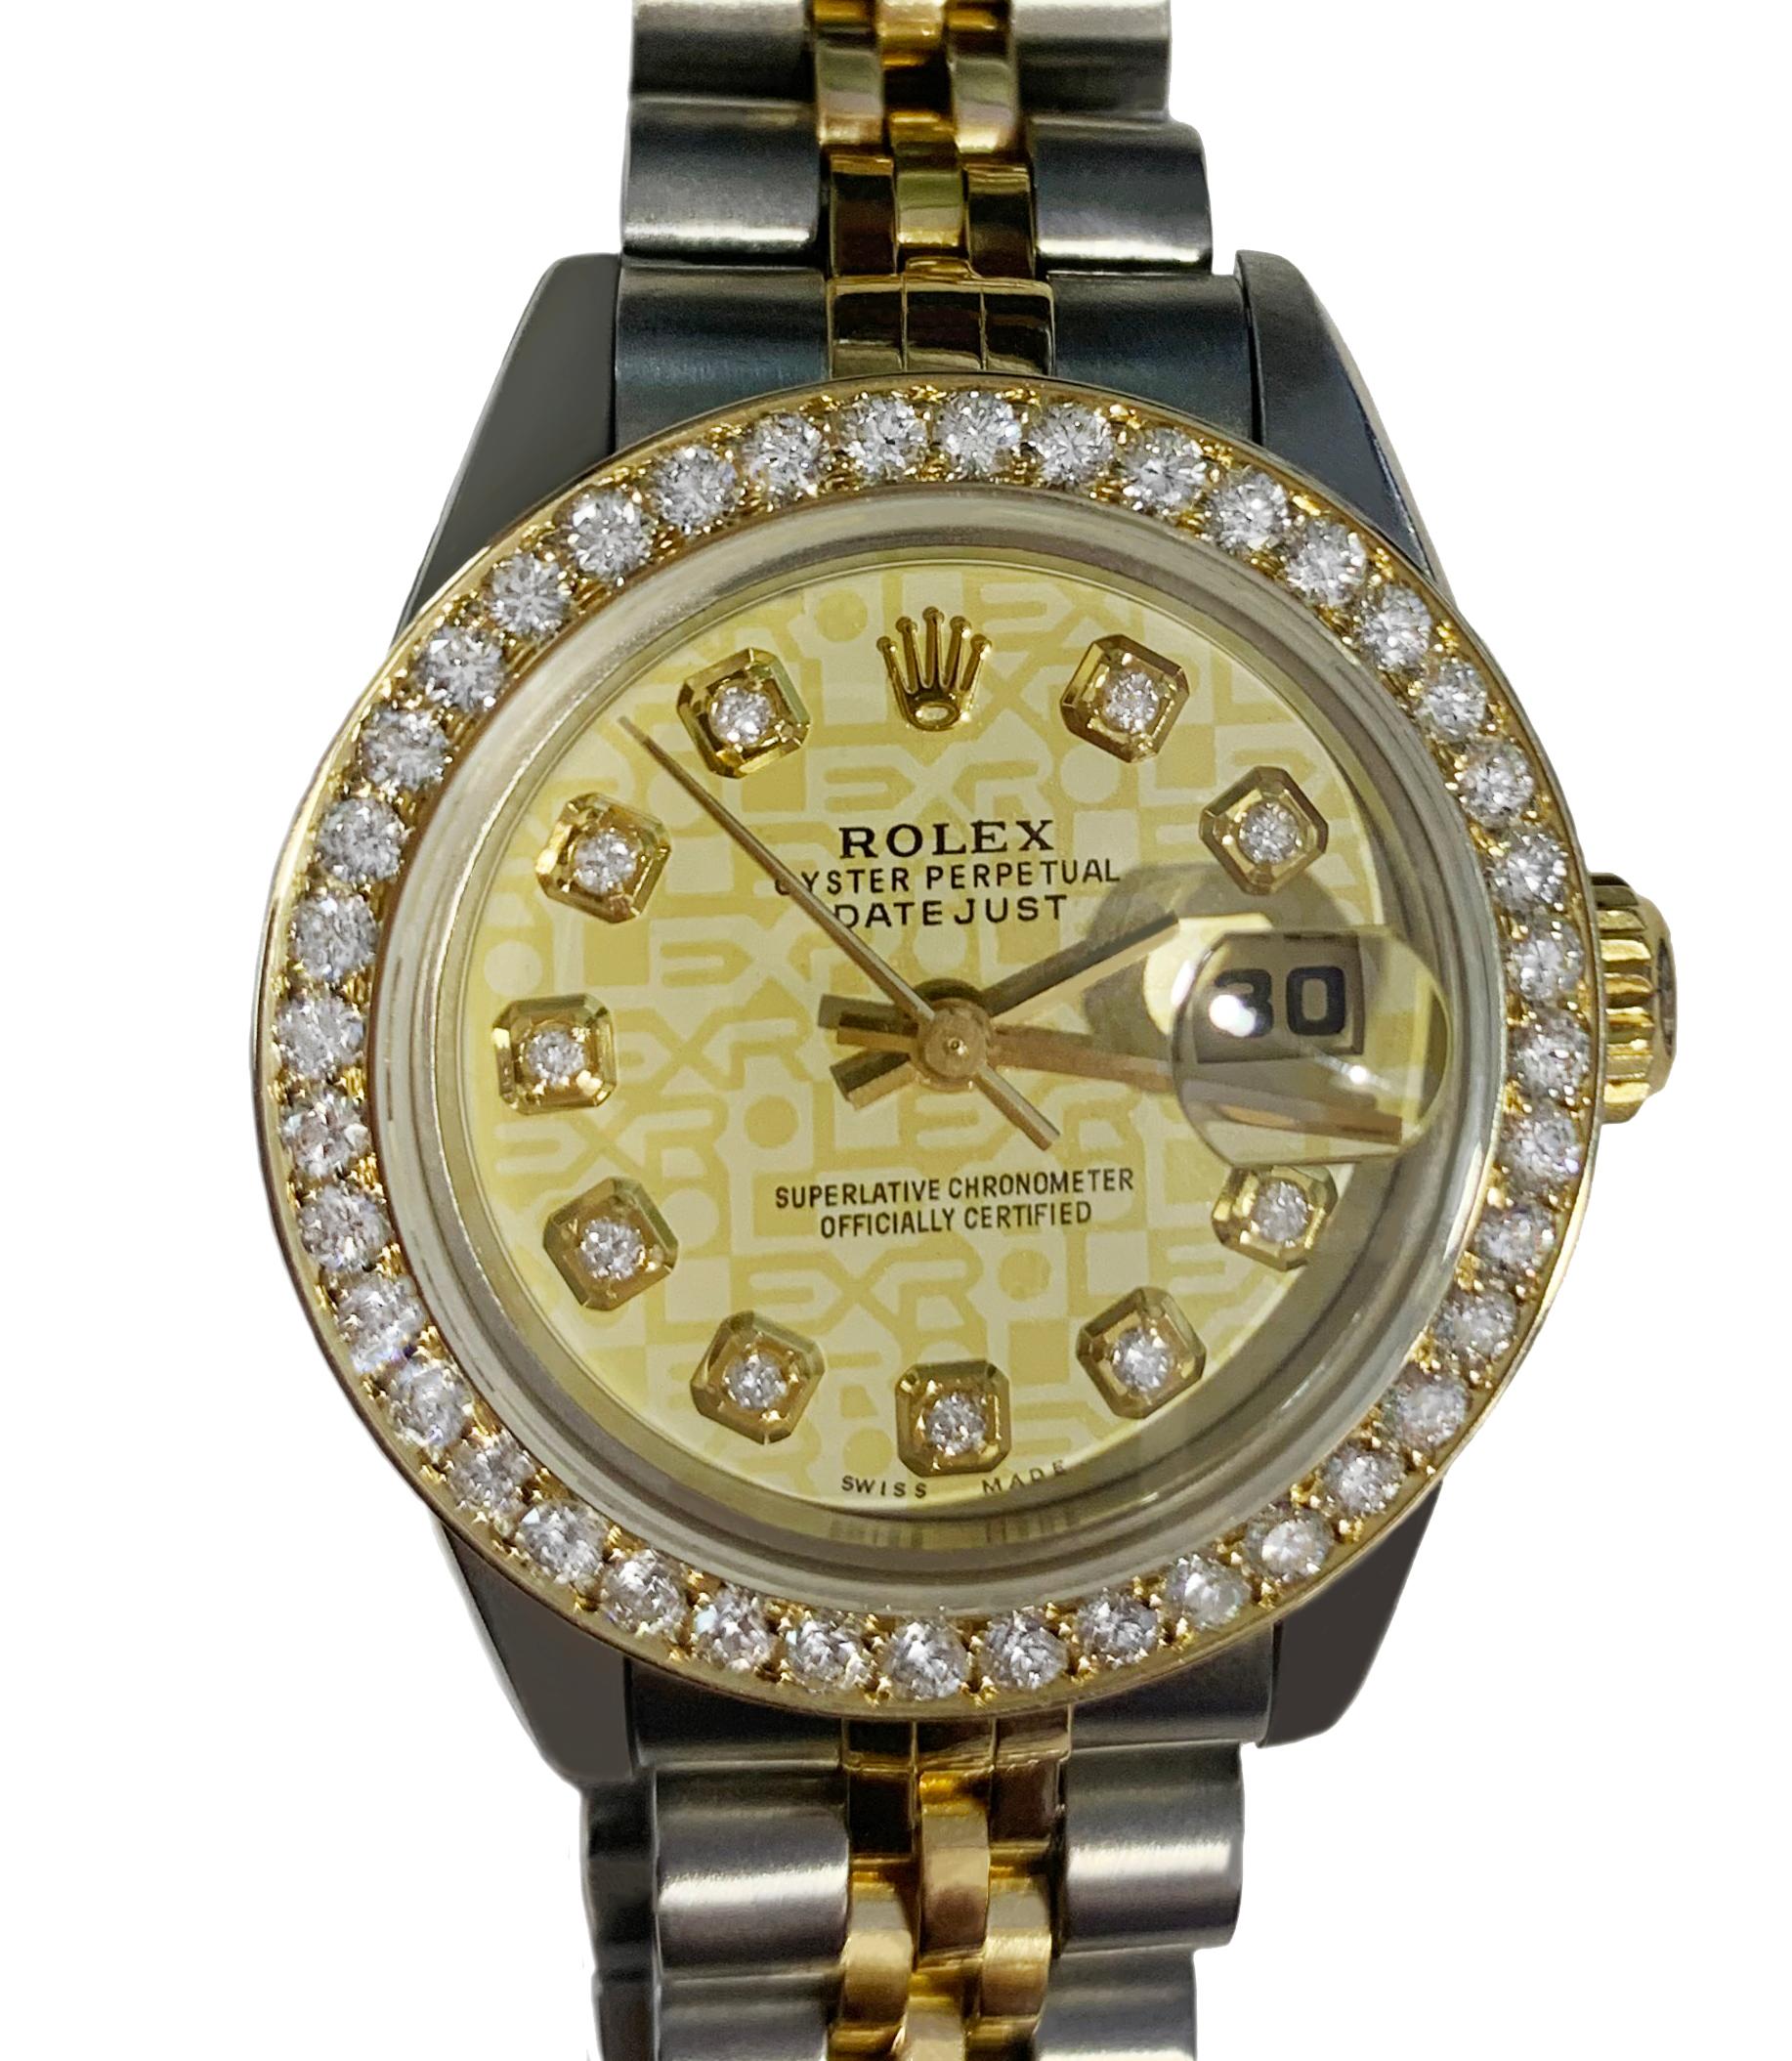 Mint condition
-Case size: 26mm
-Stainless steel & 18k Yellow gold
-Aftermarket Diamond Bezel: 1.00ct, VS/ E-F
-Aftermarket Diamond Dial
-Date indicator
-Comes with Box, no papers